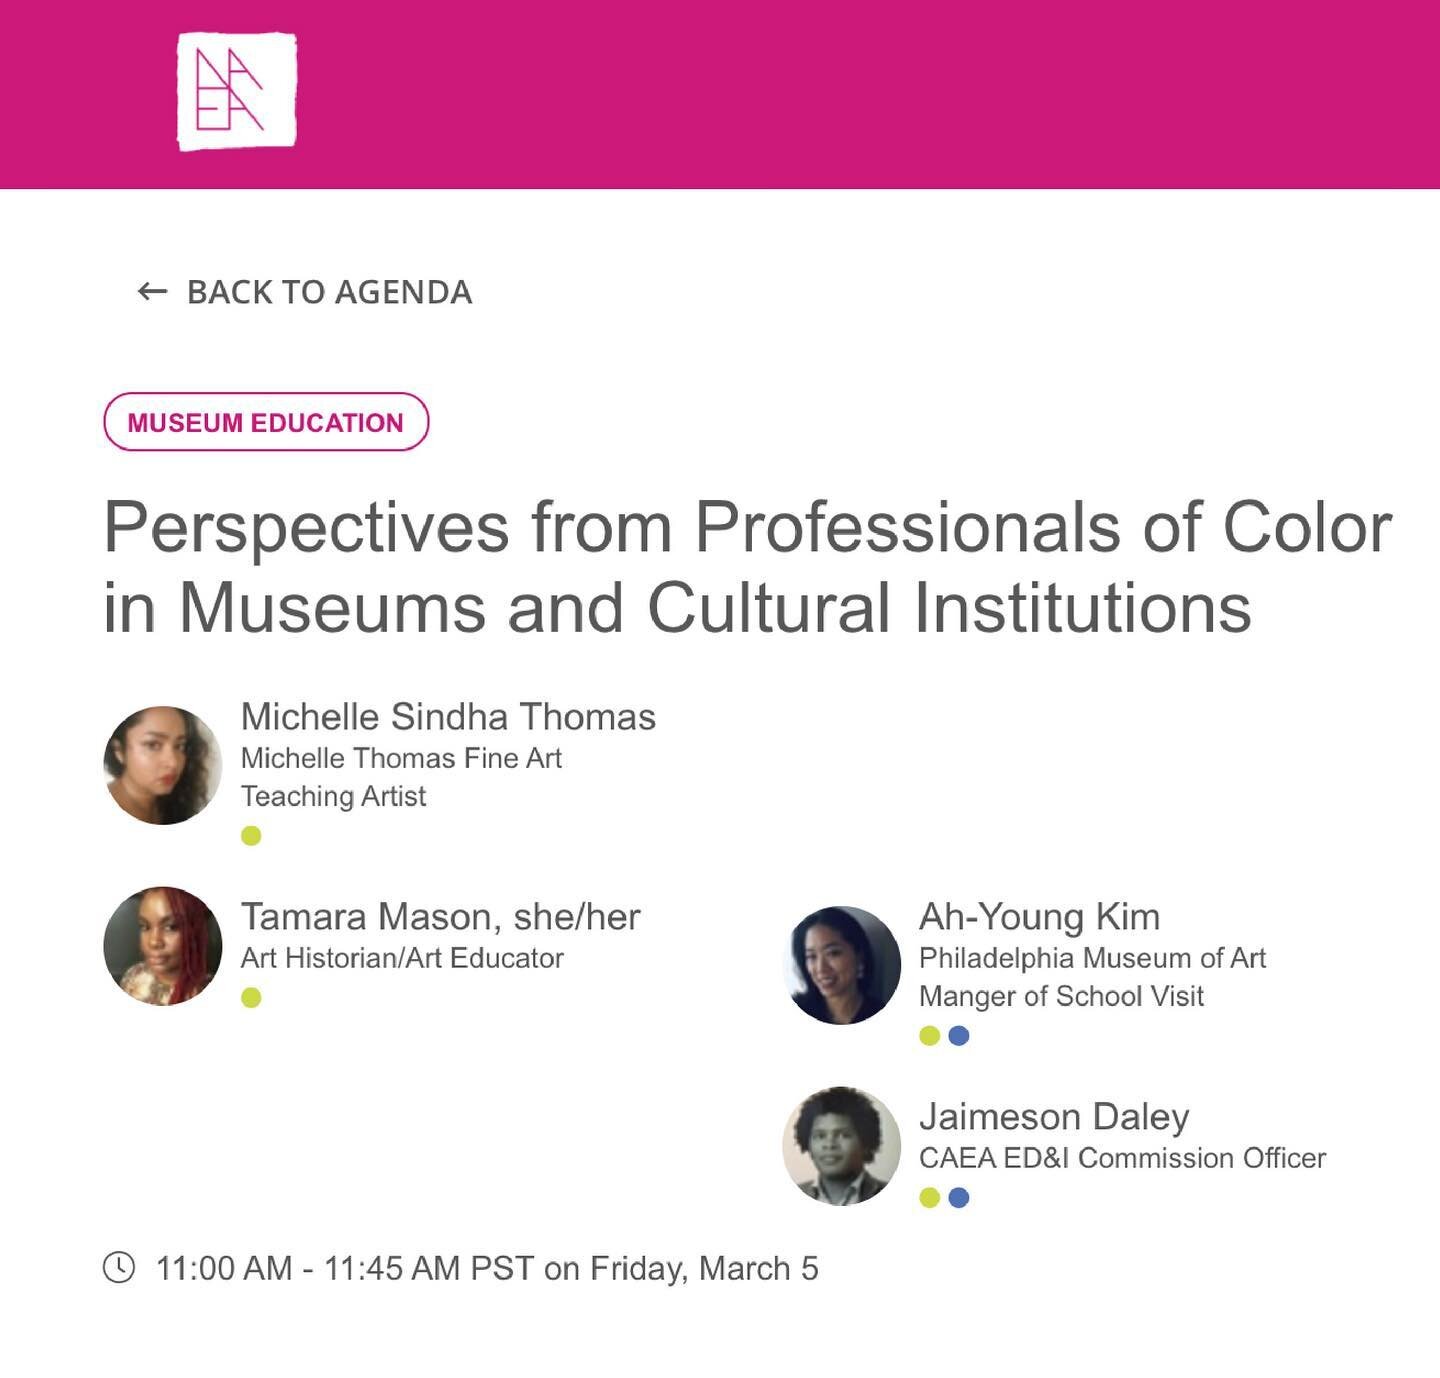 An honor to present with this panel of bright stars at the 2021 NAEA National Convention.

My talking points, in summary:

I'm a teaching artist with experience in the context of schools, museums, city art centers, community art making initiatives, a